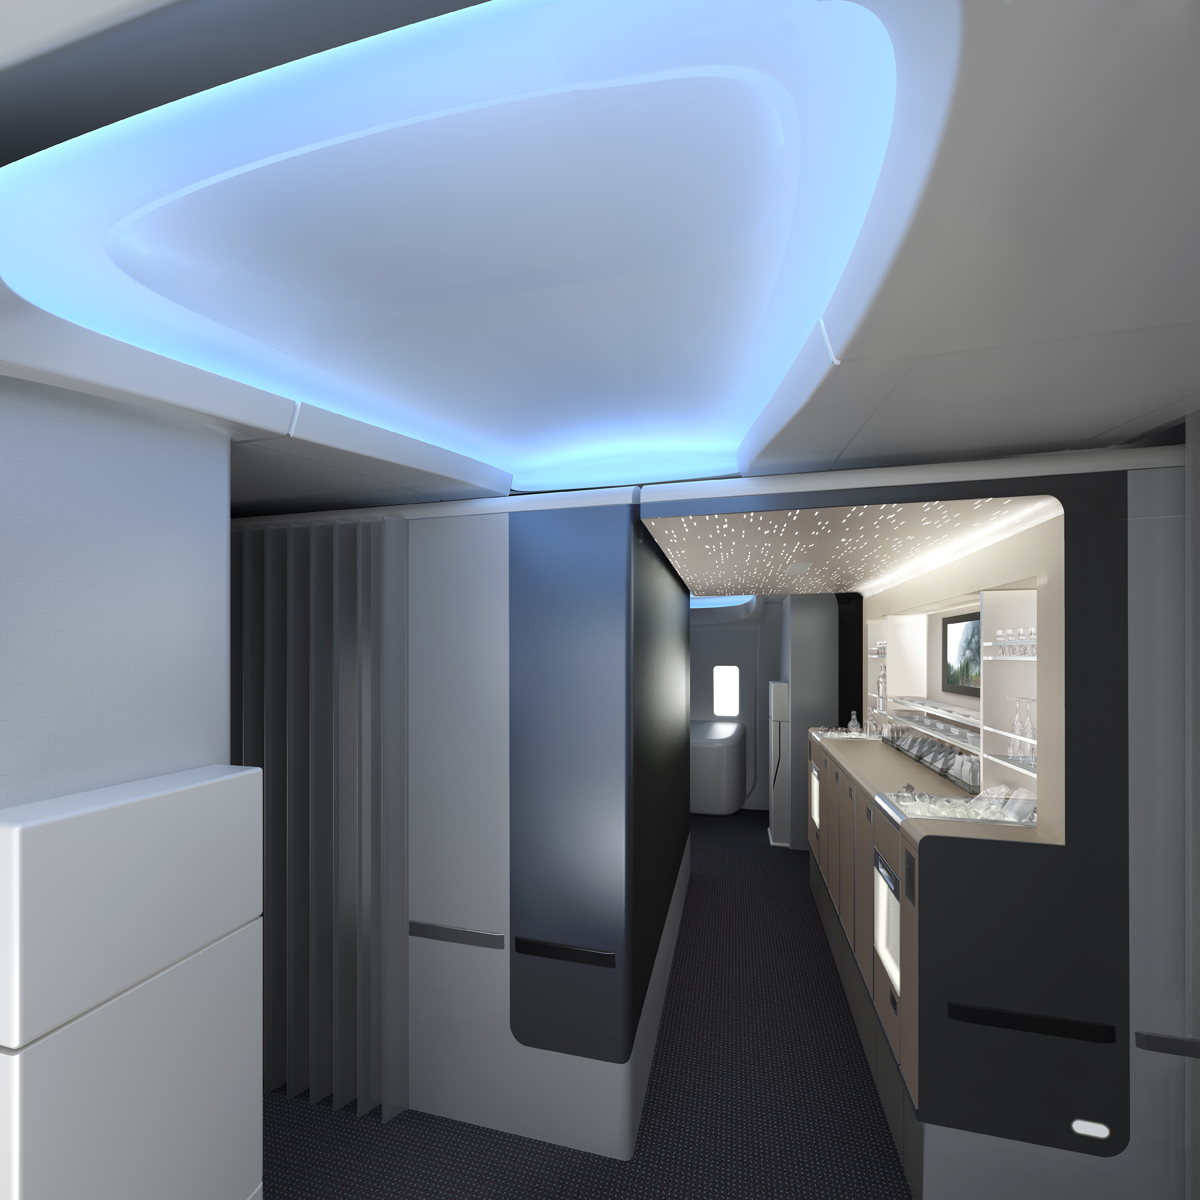 American Airlines Shows Off New Boeing 777-300ER Interior ...